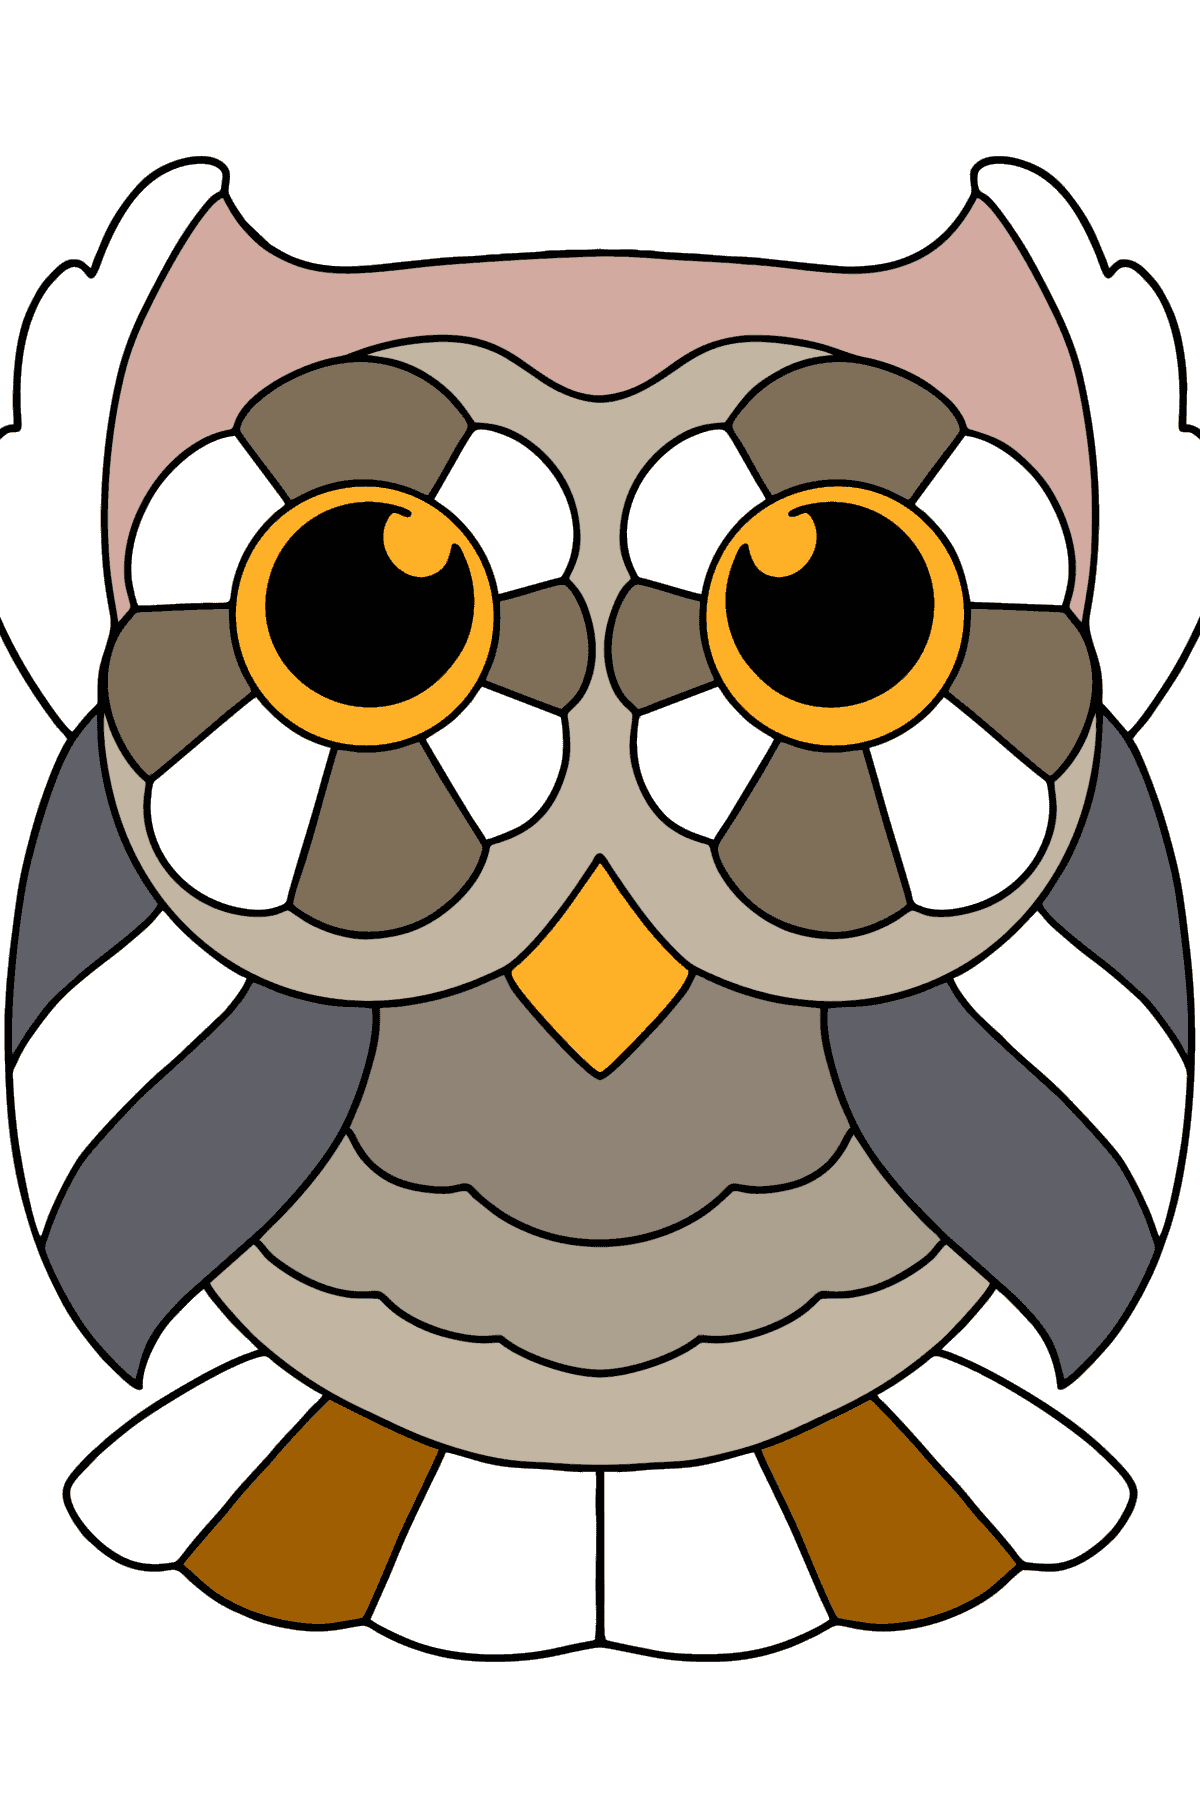 Easy stress relief coloring page - Owl - Coloring Pages for Kids